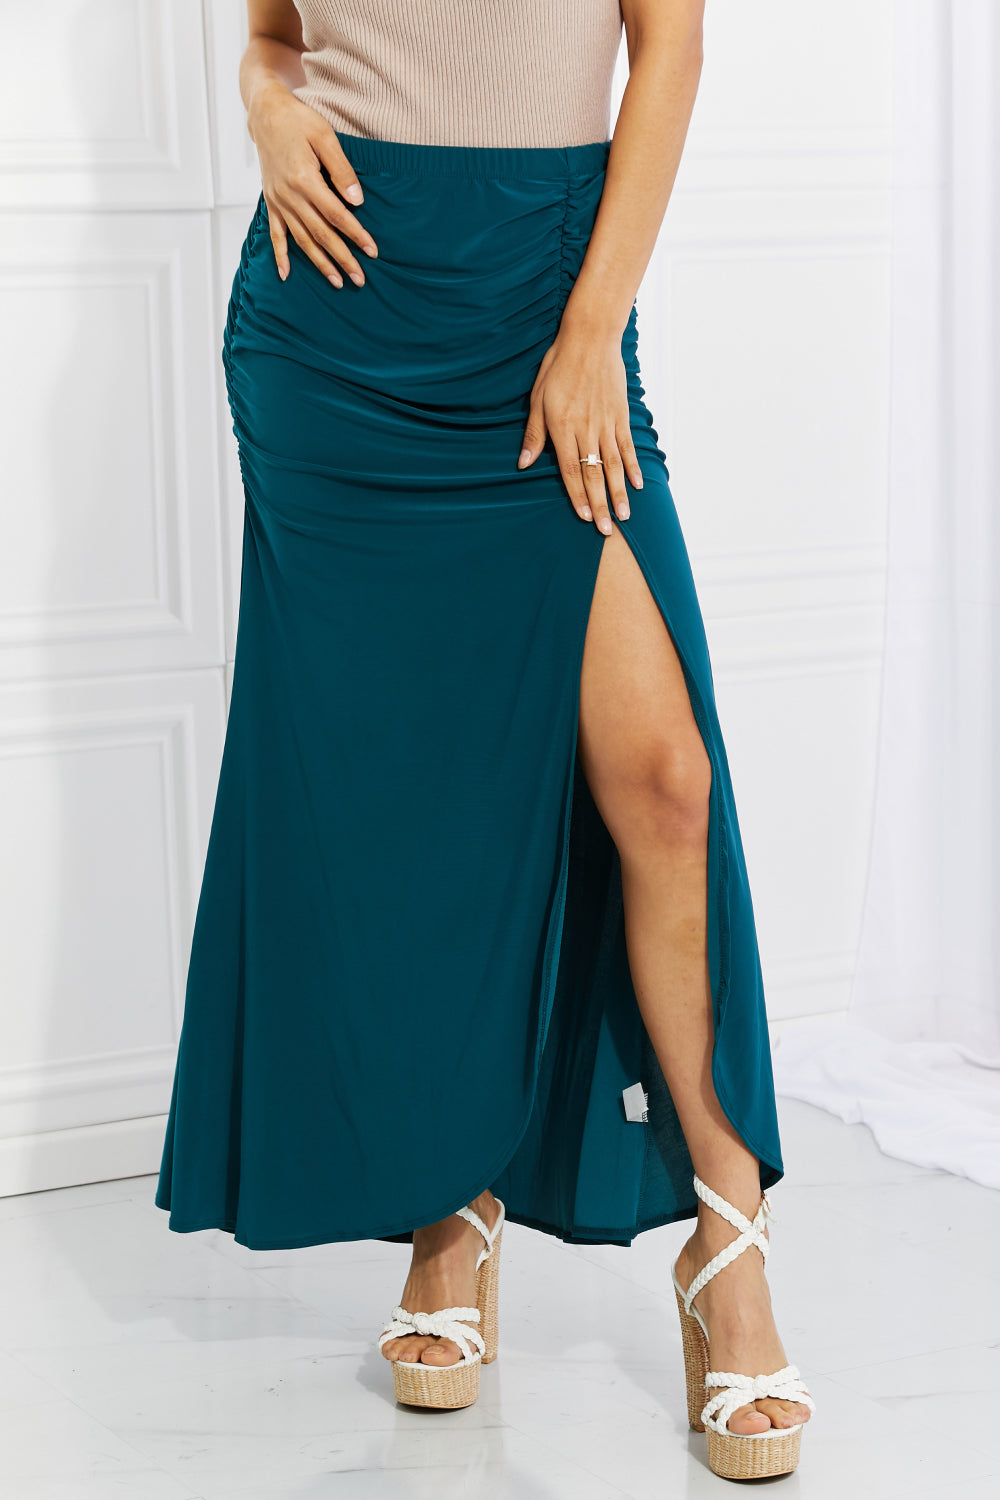 White Birch Up and Up Ruched Slit Maxi Skirt in Teal